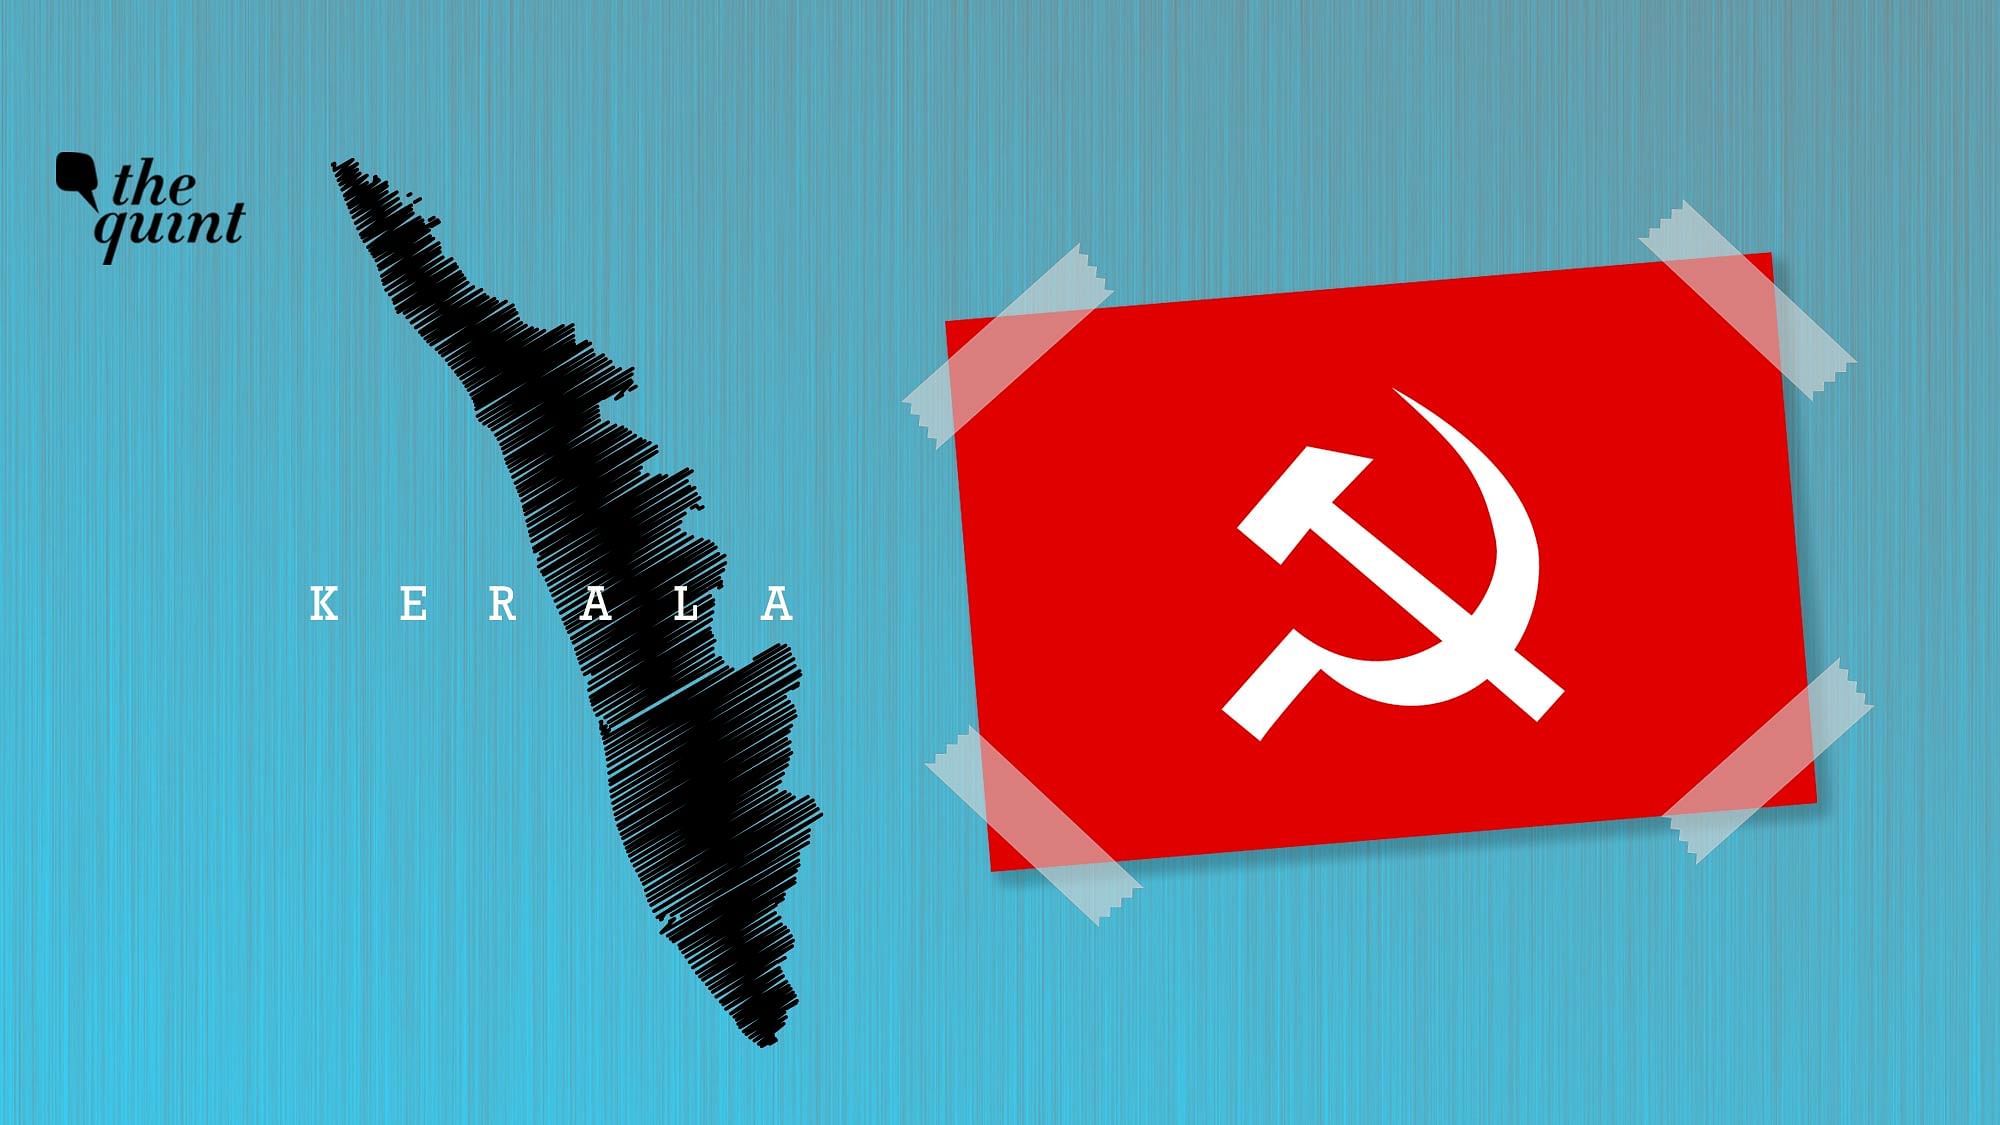 Image of Kerala map and LDF party symbol used for representation.